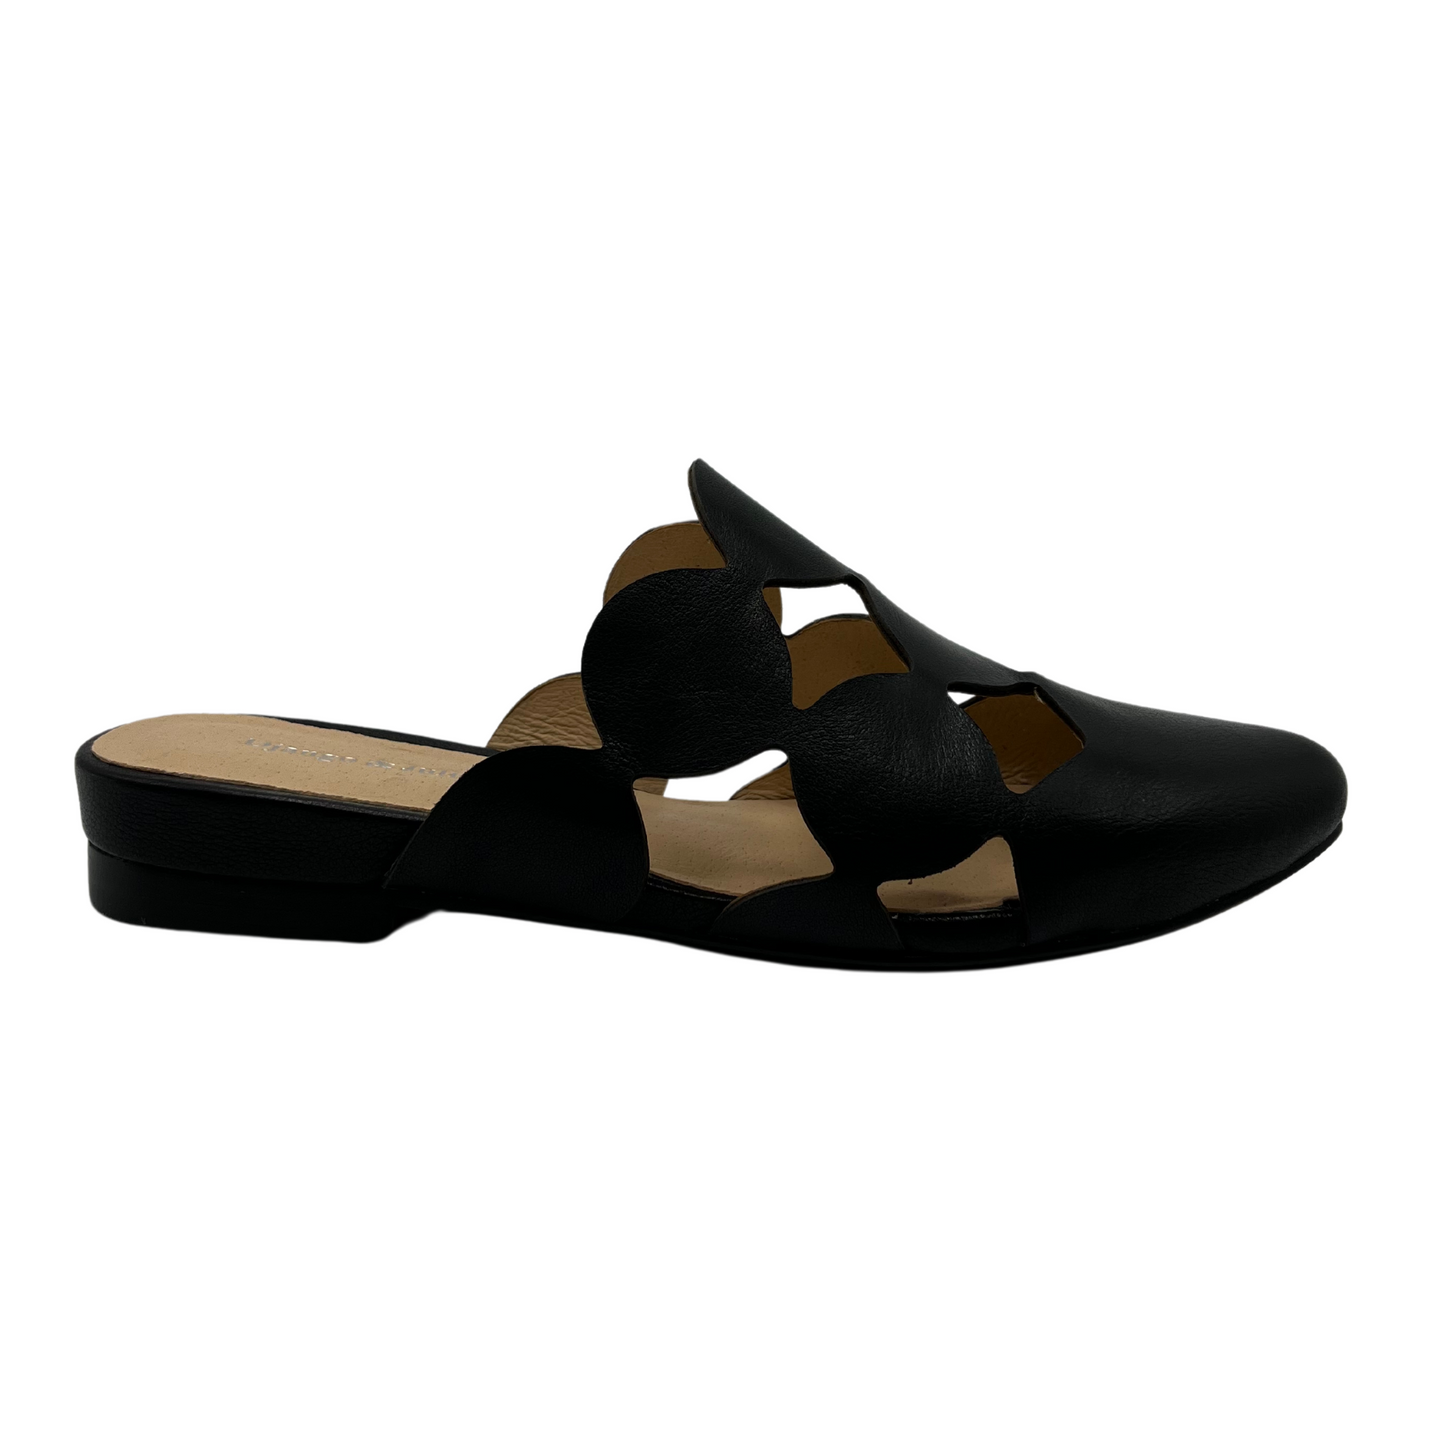 Right facing view of black leather slip on mule with pointed toe and 1 inch heel. Featuring circular cutouts on upper